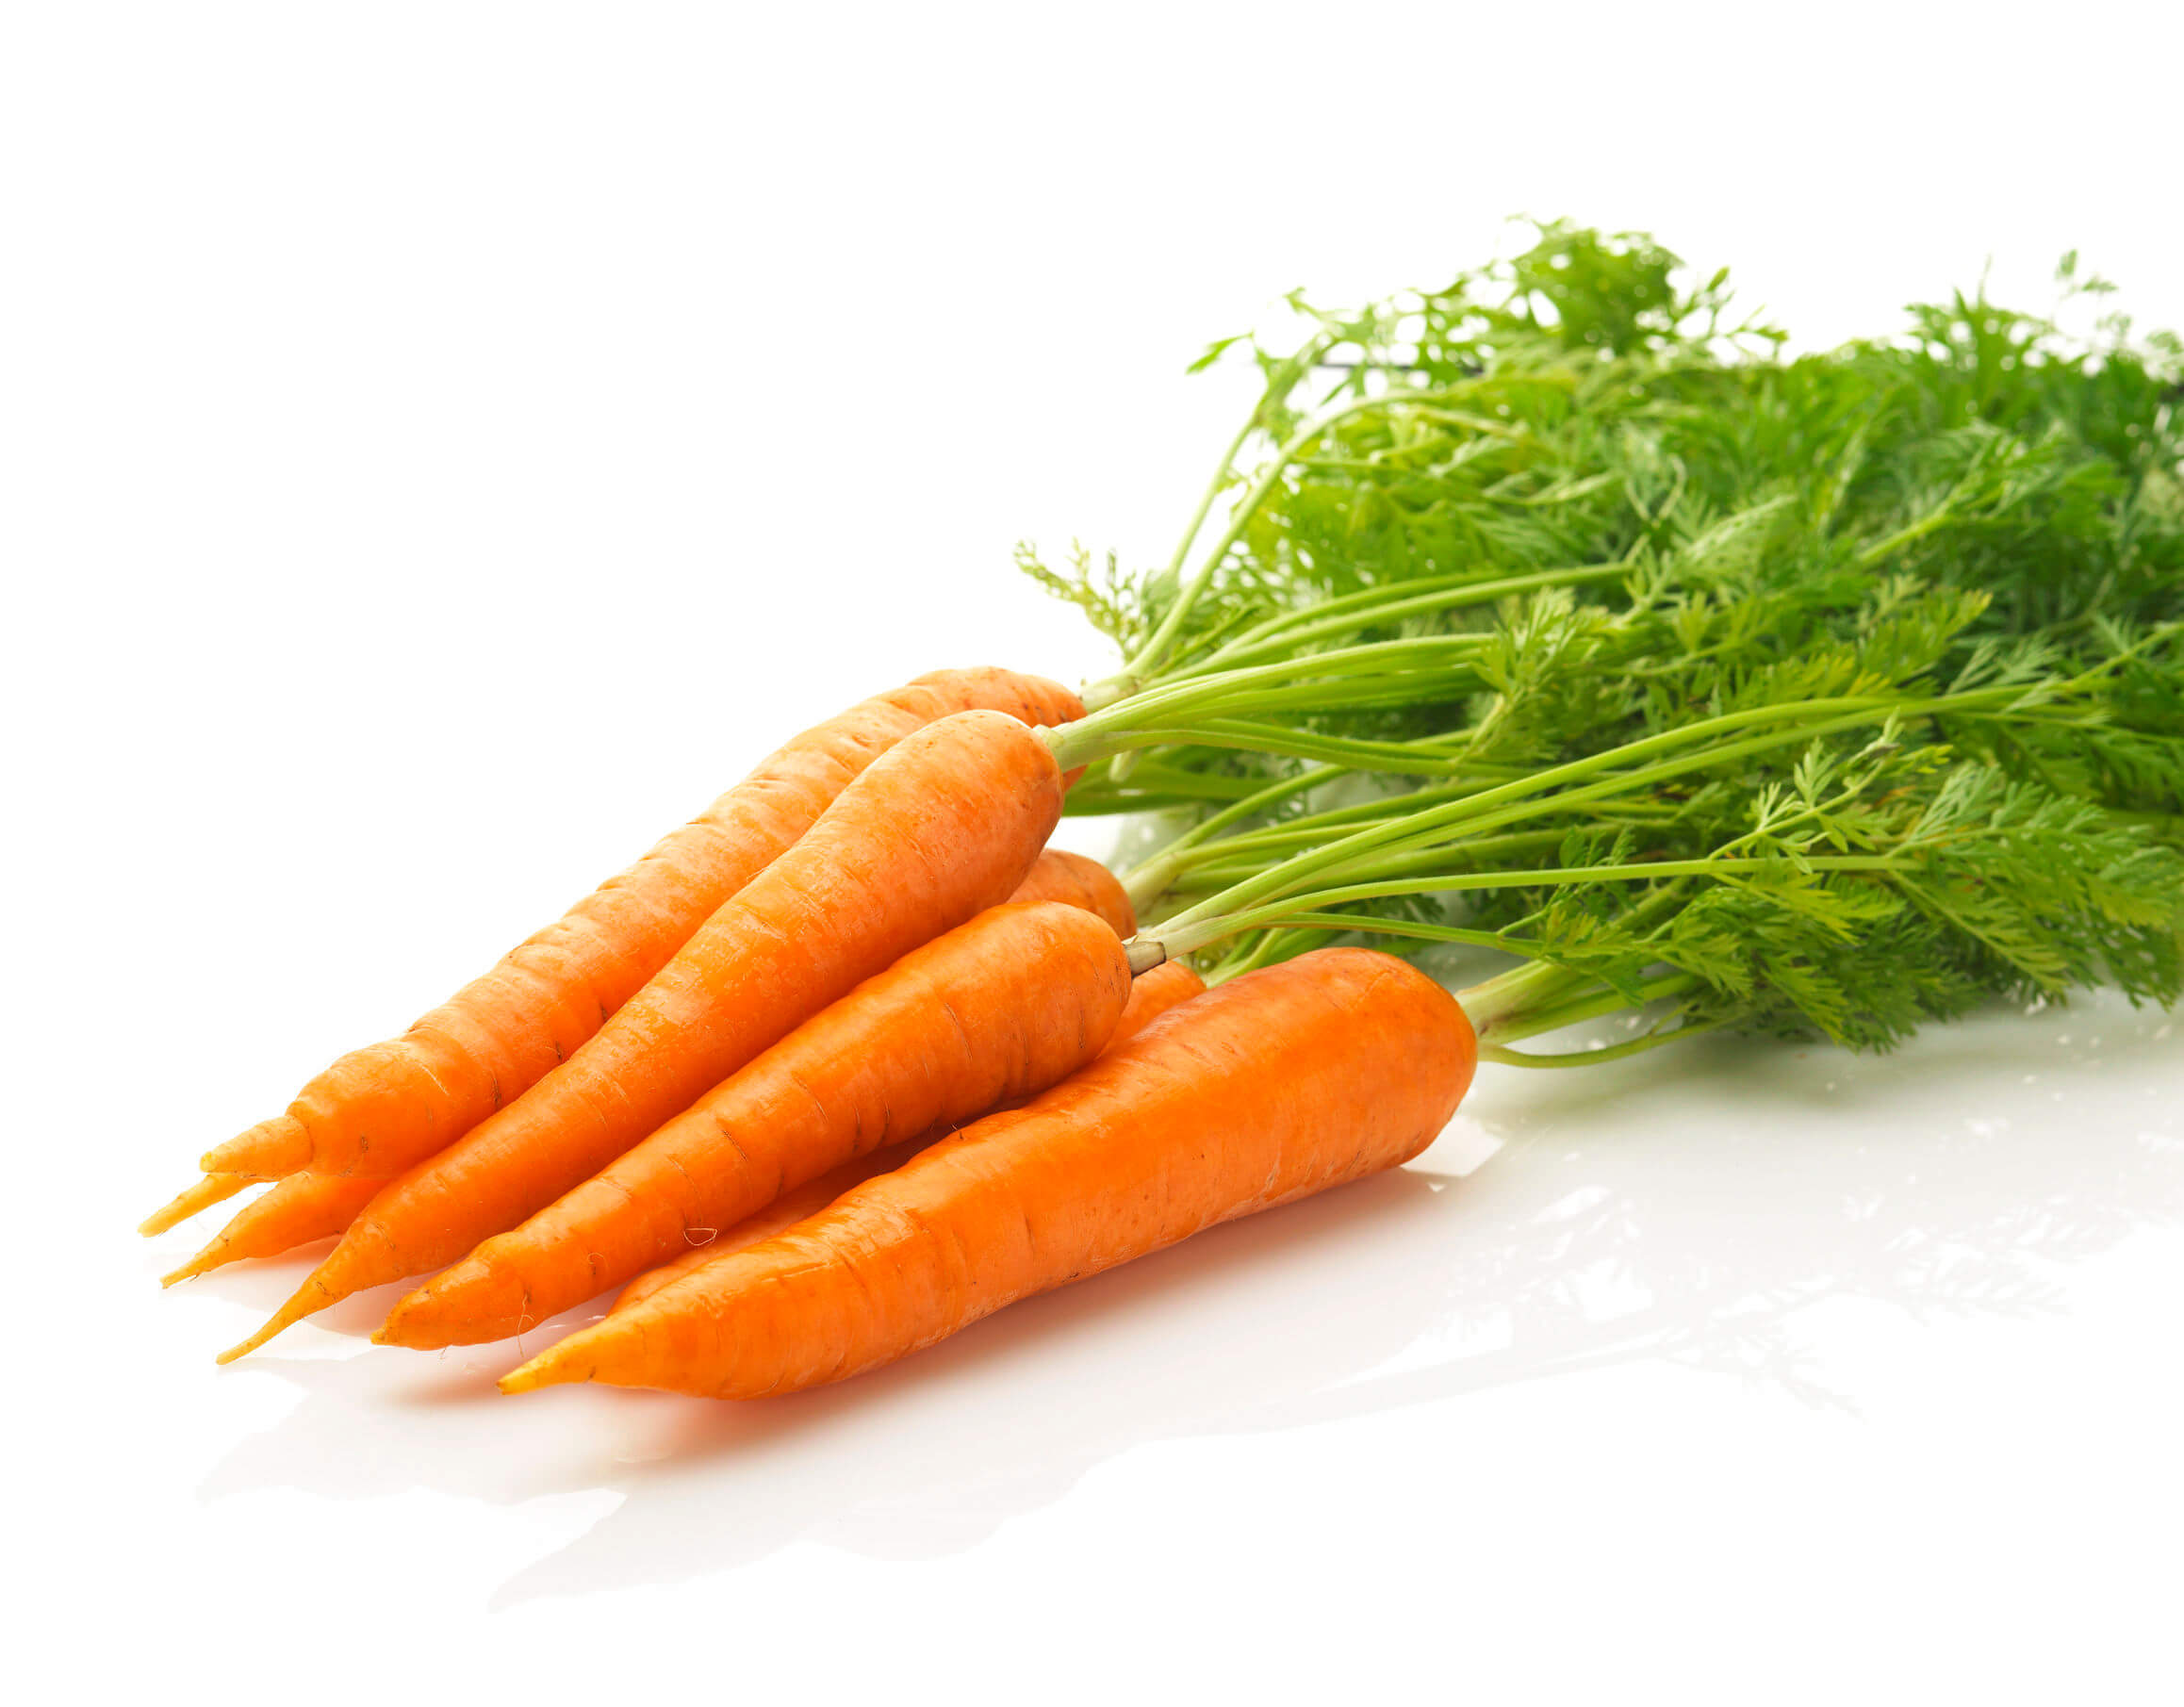 Carrots are an excellent source of beta carotene